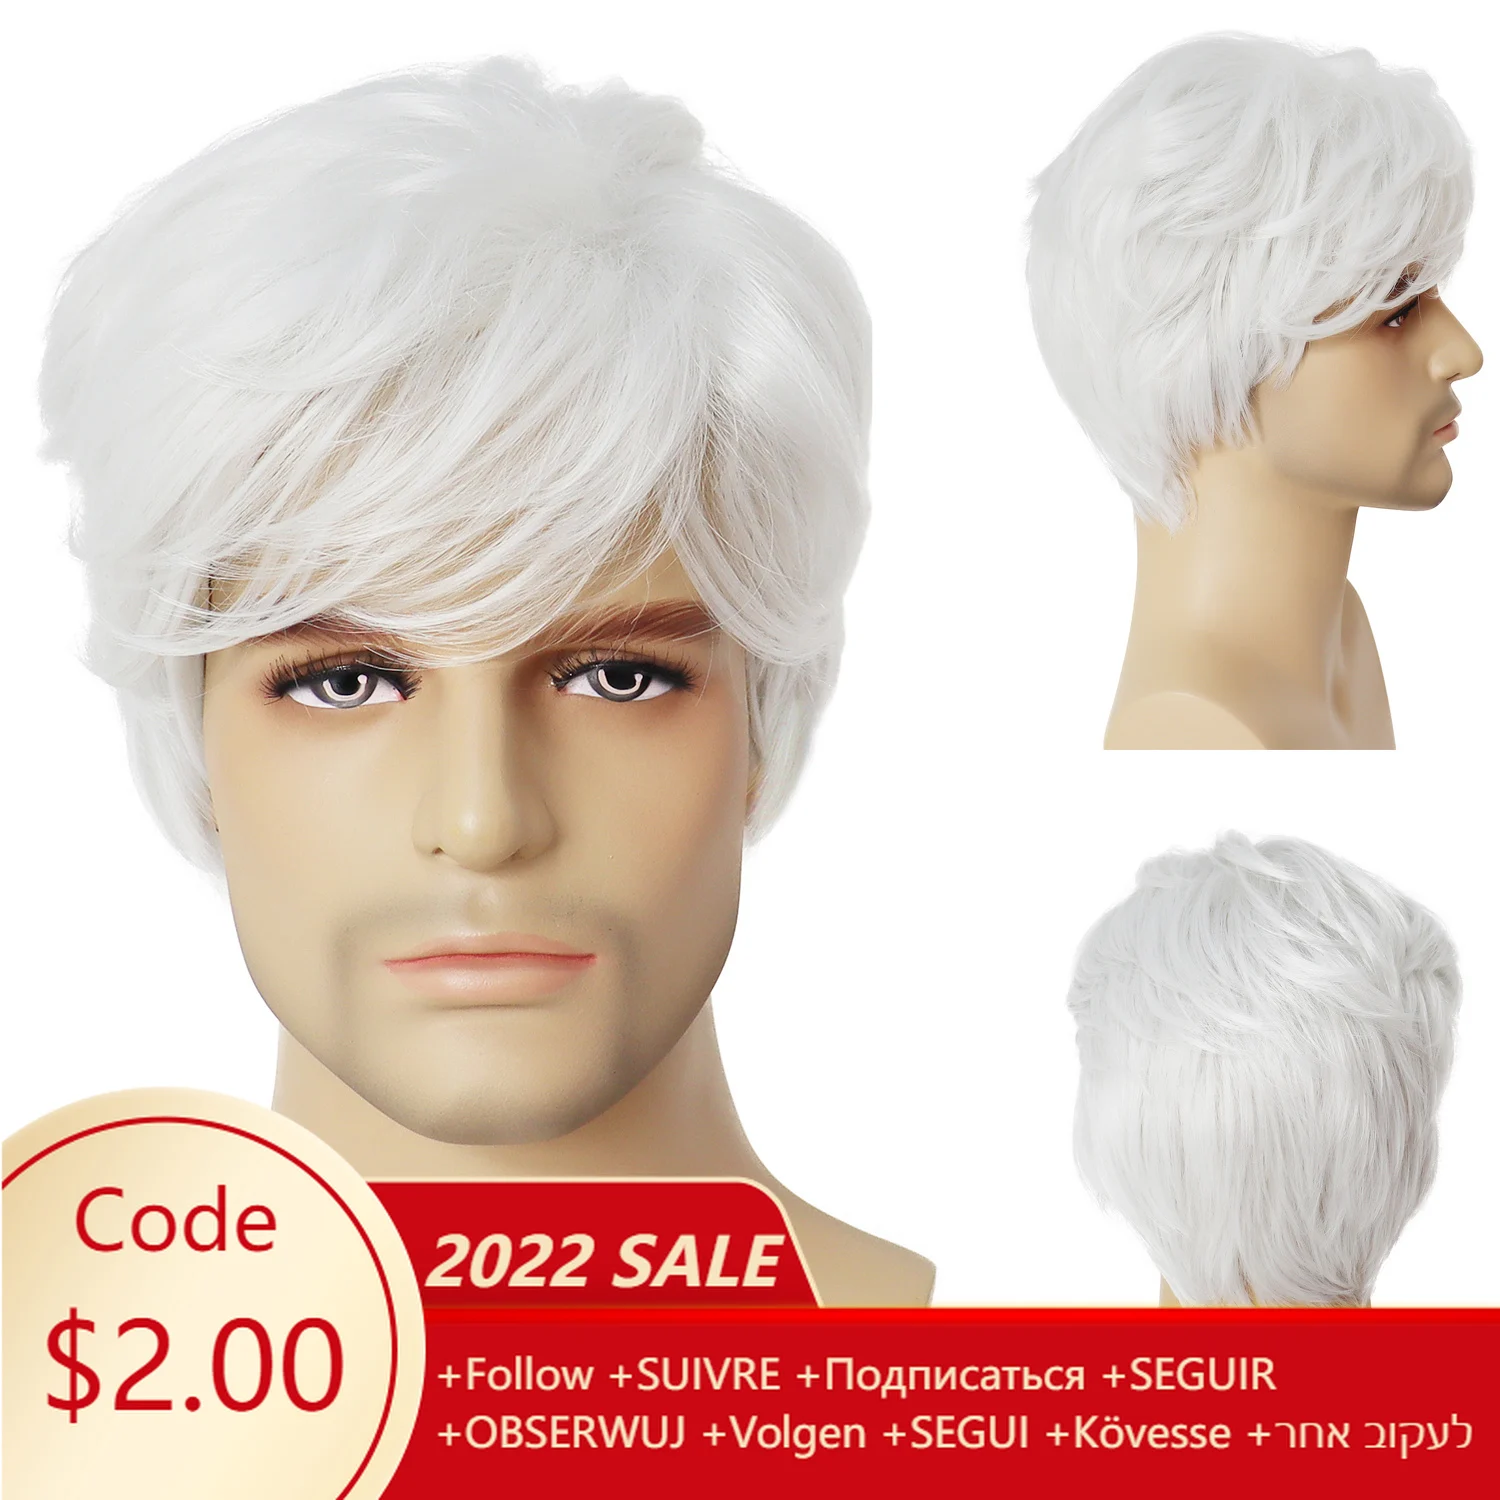 GNIMEGIL Synthetic Wigs for Men Short White Hair Wig with Bangs Anime Male Cosplay Costume Halloween Party Grandpa Gifts Wigs